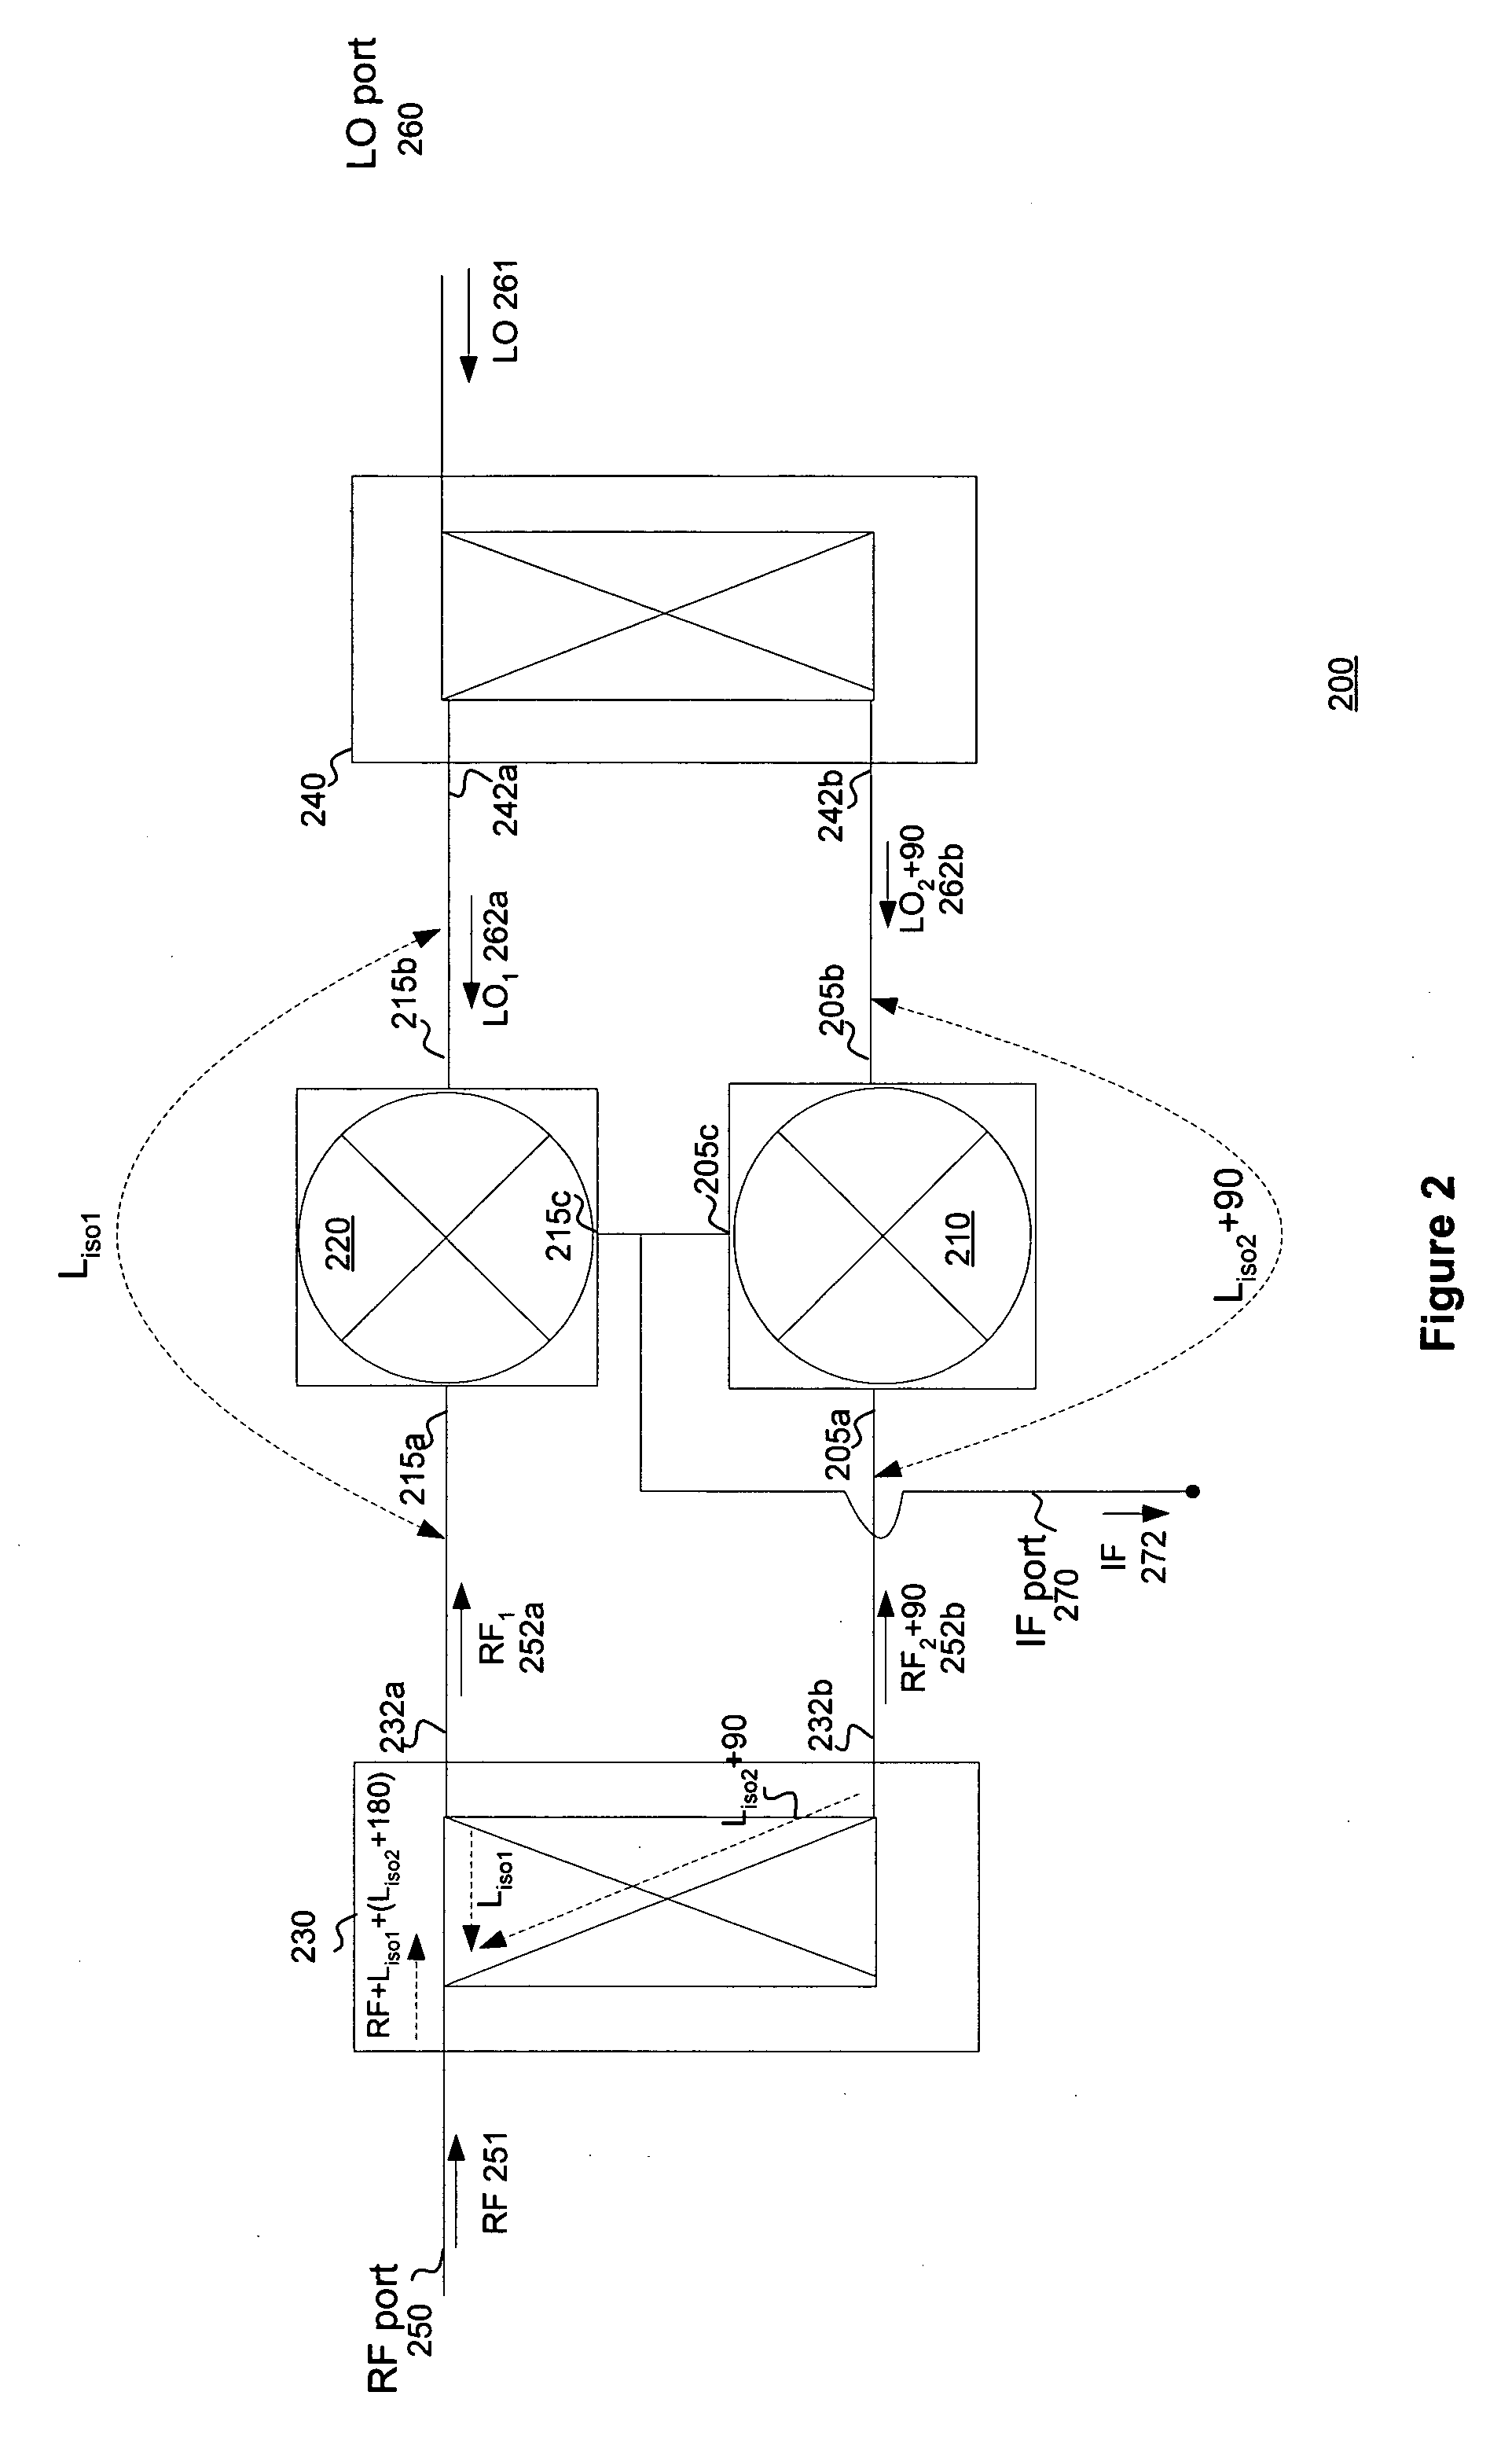 System and method for developing ultra-sensitive microwave and millimeter wave phase discriminators